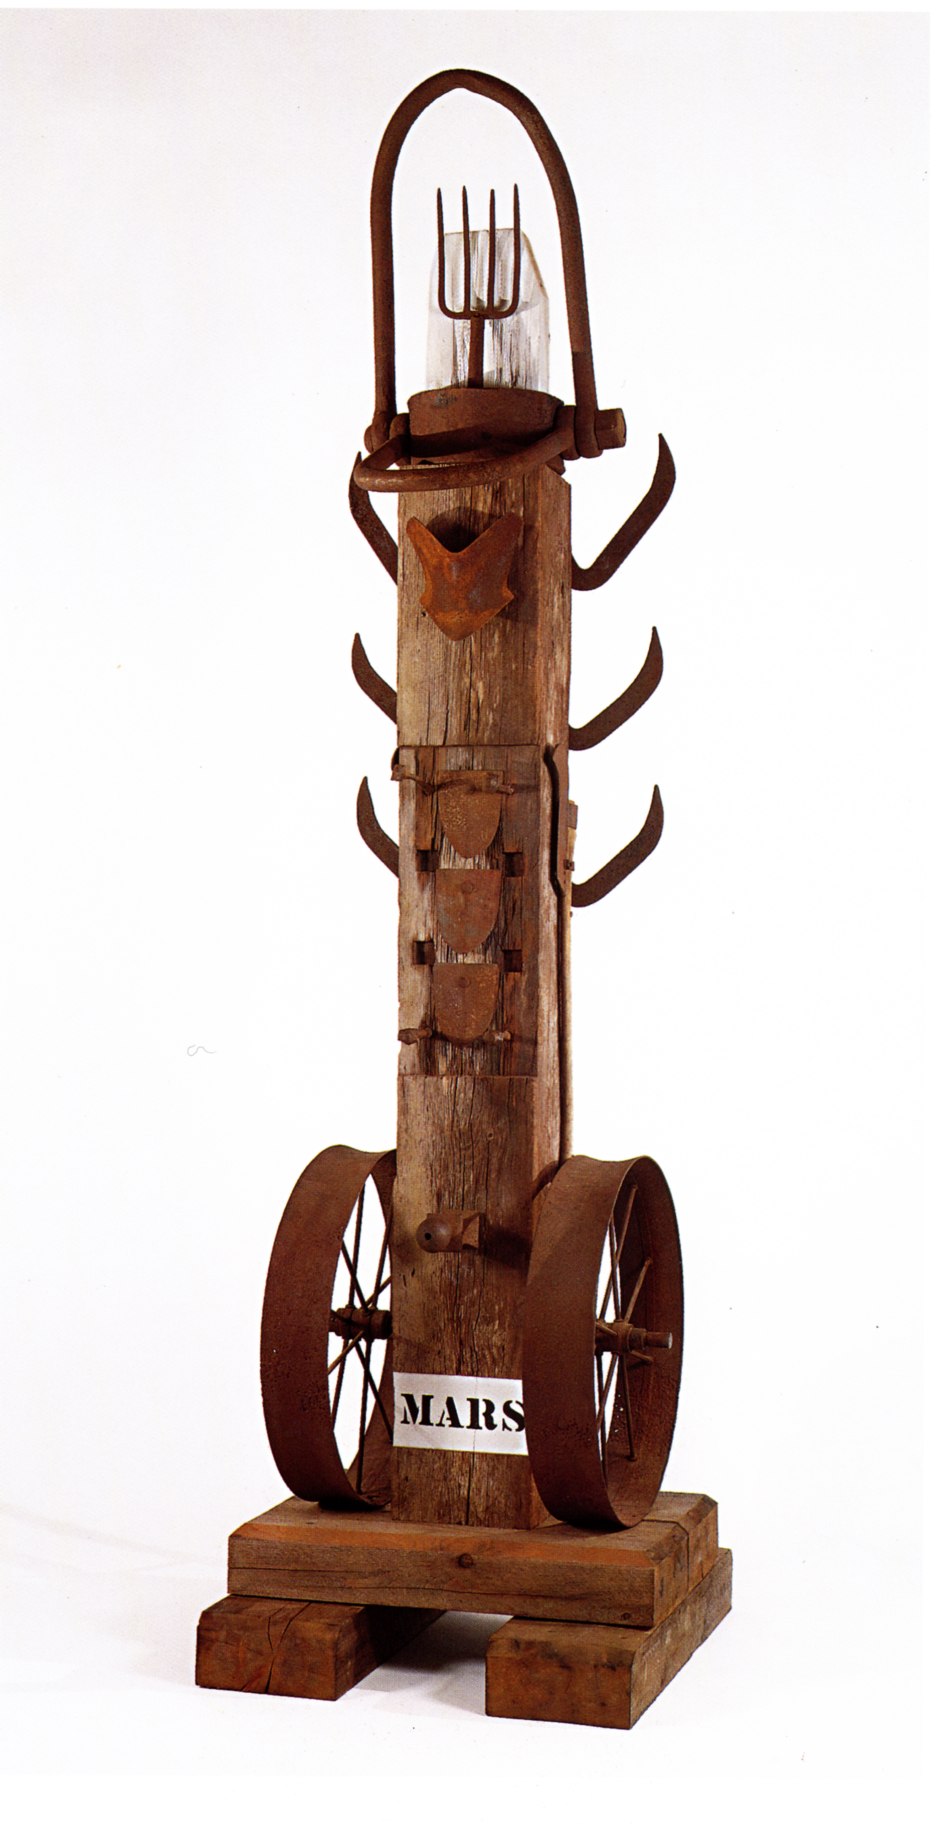 A 131 1/2 by 36 by 36 inch sculpture consisting of a wooden beam atop a wooden base. The work's title, &quot;Mars,&quot; appears in stenciled letters against a white ground across the front bottom of the sculpture. An iron wheel is affixed to both the bottom right and left sides of the sculpture. Three iron brush axes have been affixed to both the upper right and upper left sides of, and an iron pitchfork has been affixed at the top of the sculpture.